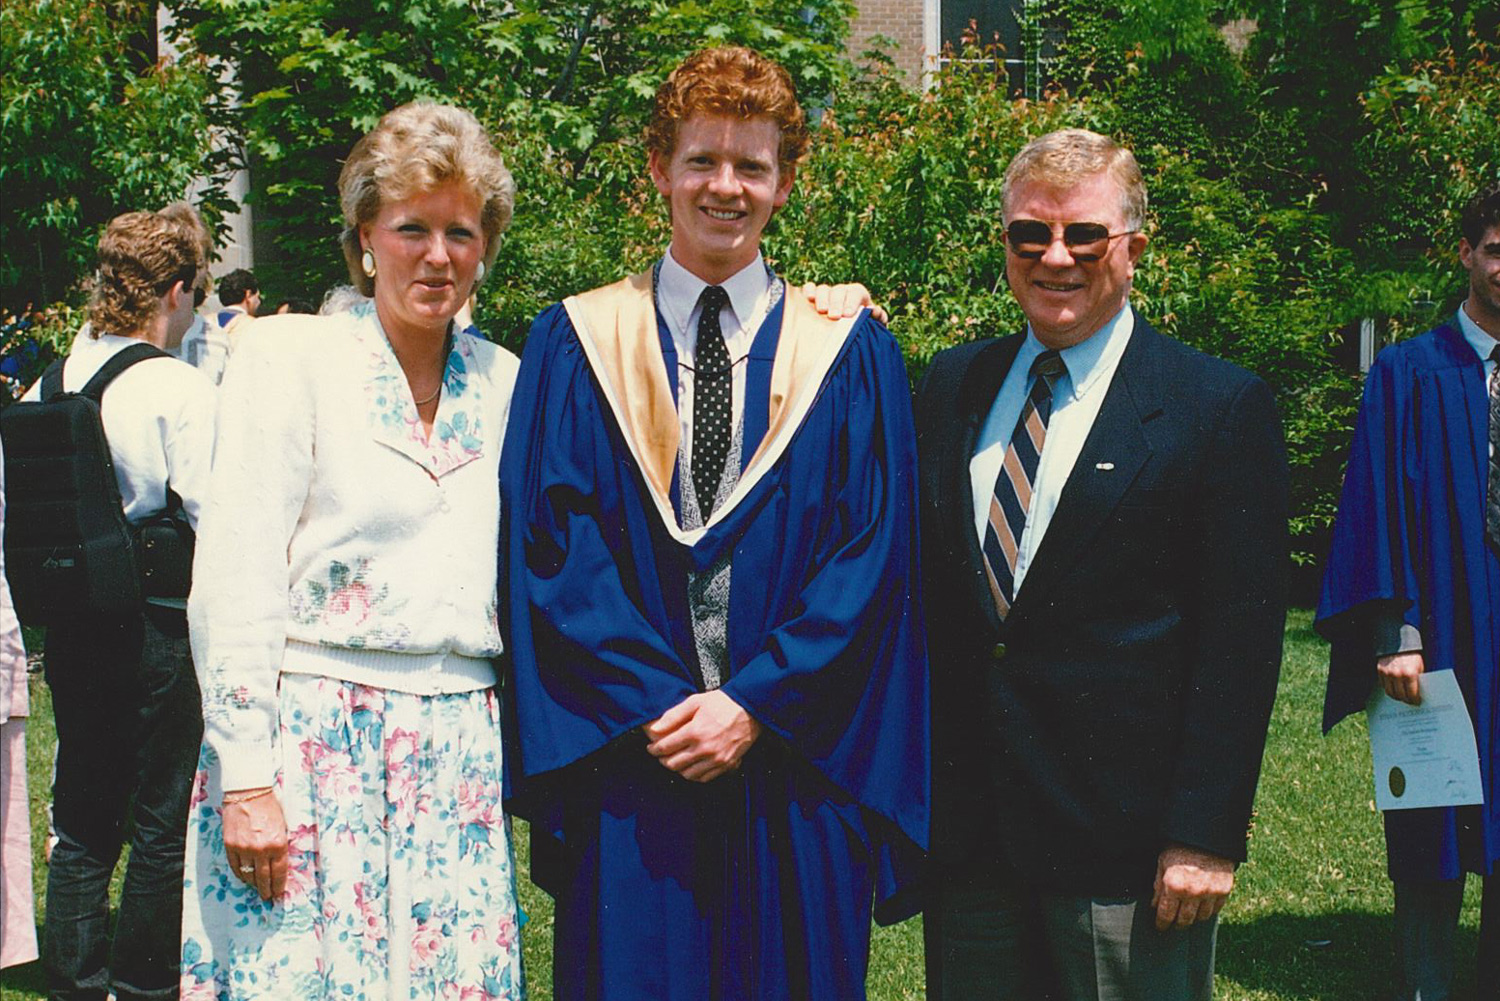 amie at Convocation with his parents on either side of him.